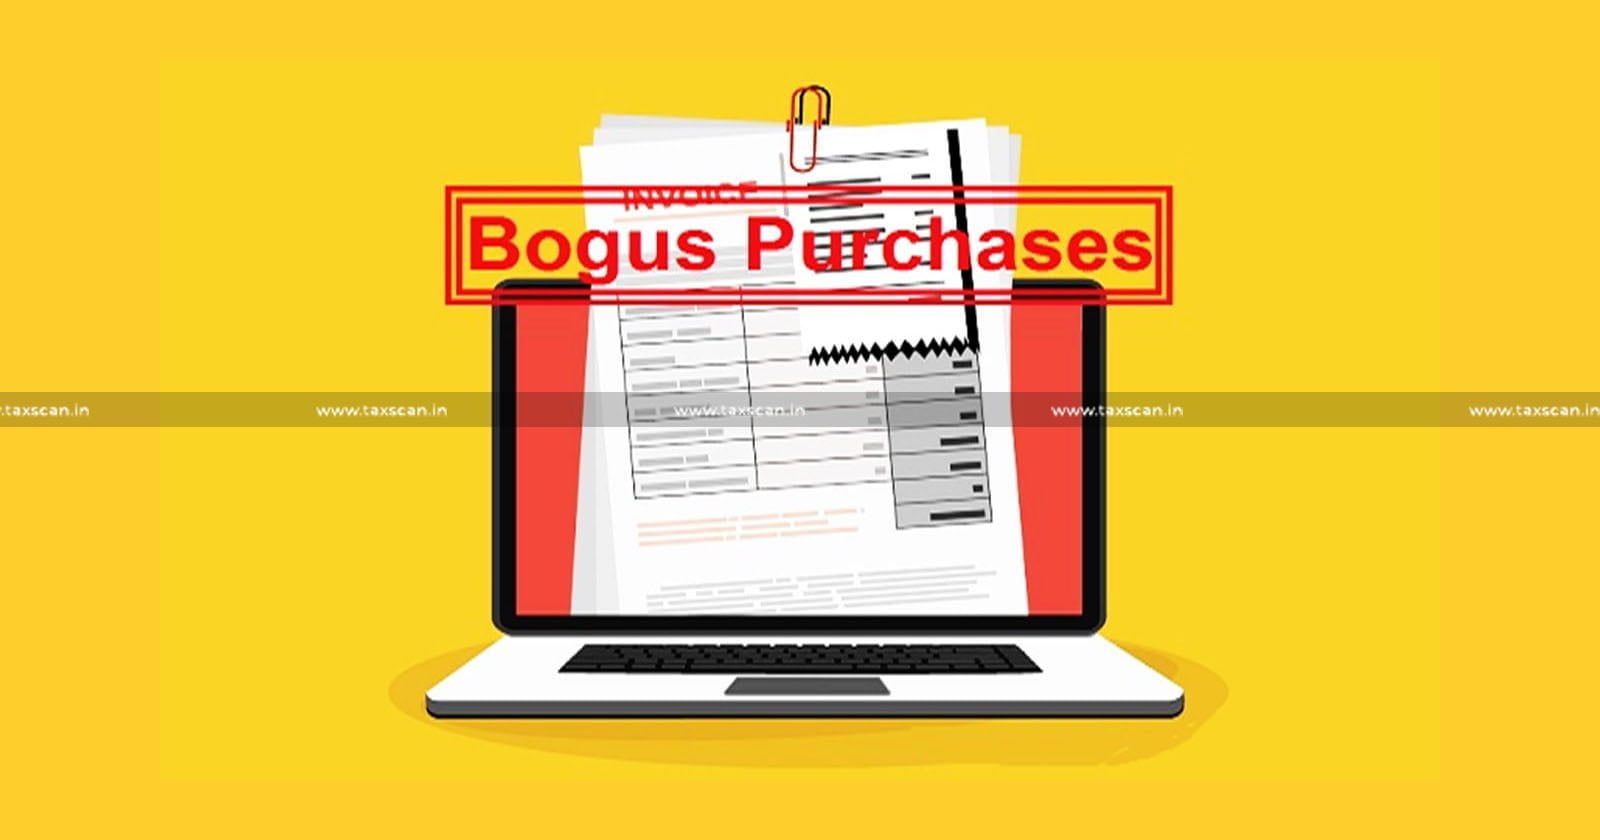 Bogus Purchase - Identical Name of Assessee - Assessee - Cross-Examine - Orissa High Court - Taxscan